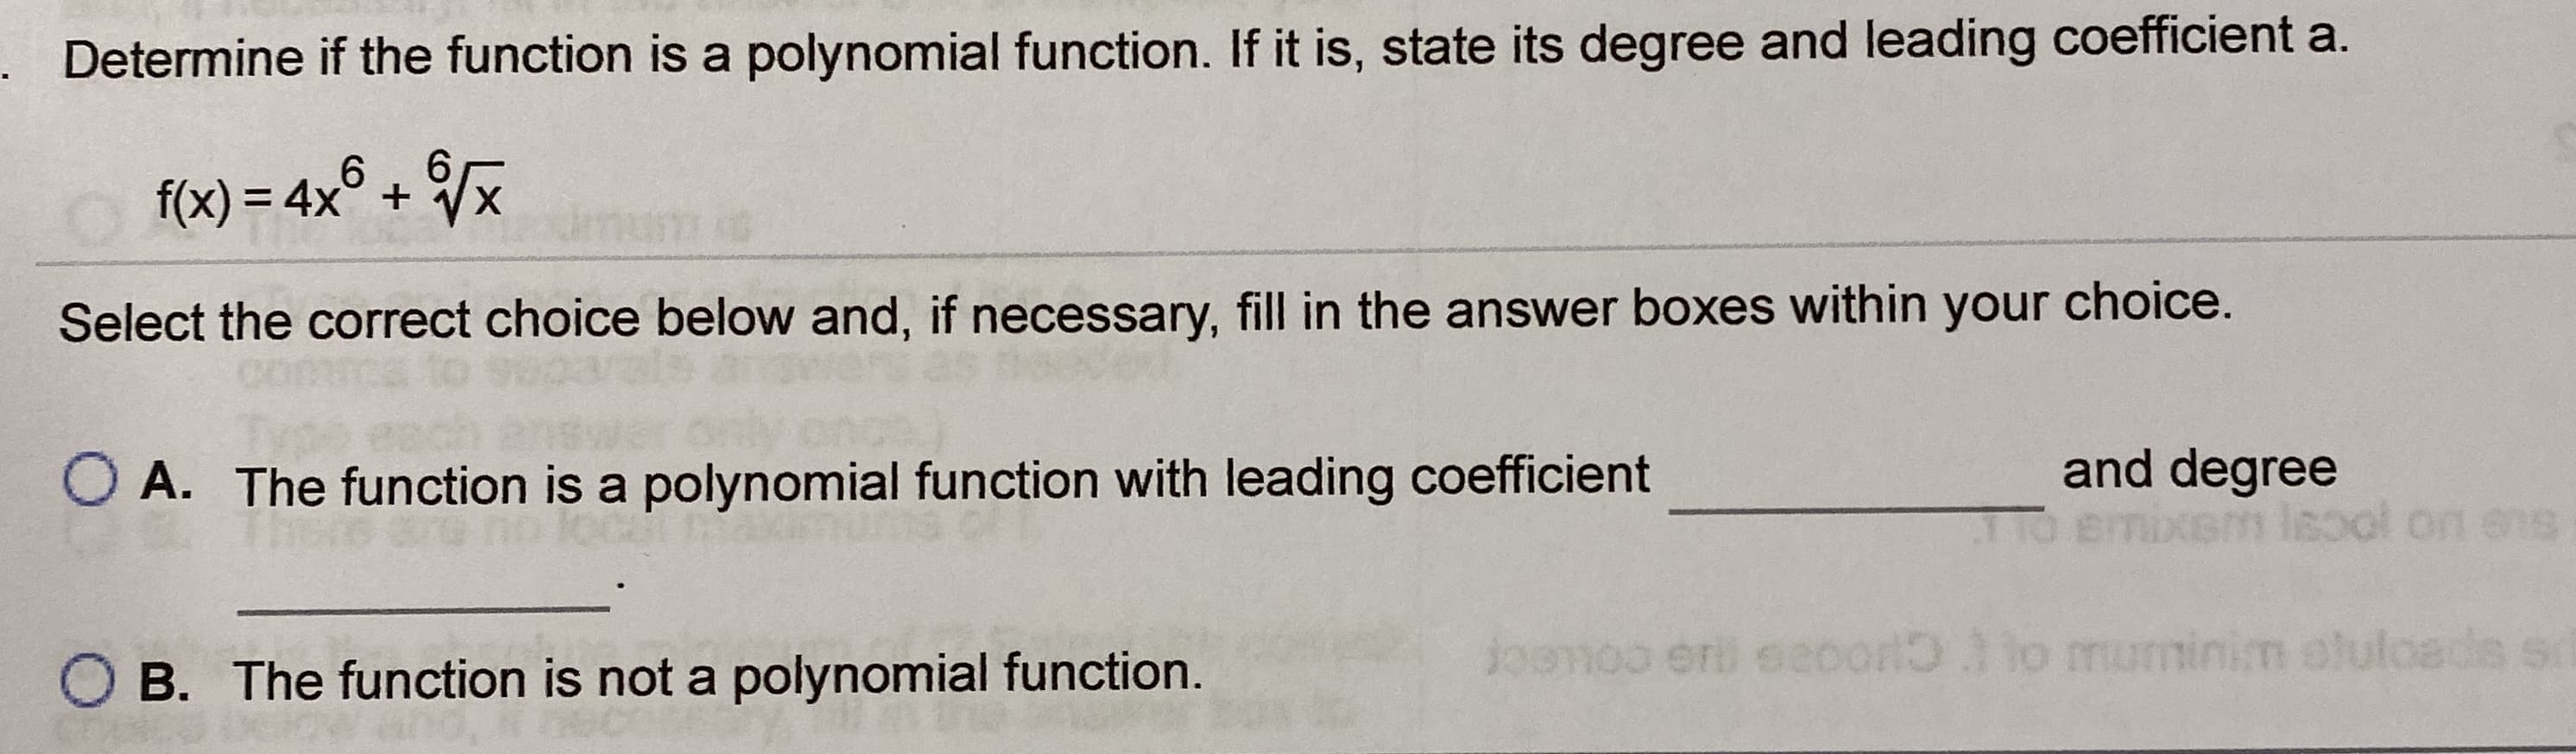 Determine if the function is a polynomial function. If it is, state its degree and leading coefficient a.
f(x) = 4x° + Vx
Select the correct choice below and, if necessary, fill in the answer boxes within your choice.
O A. The function is a polynomial function with leading coefficient
and degree
Kem lsool on ens
Joanoo uminim oluloads so
er eeoor lo m
B. The function is not a polynomial function.
